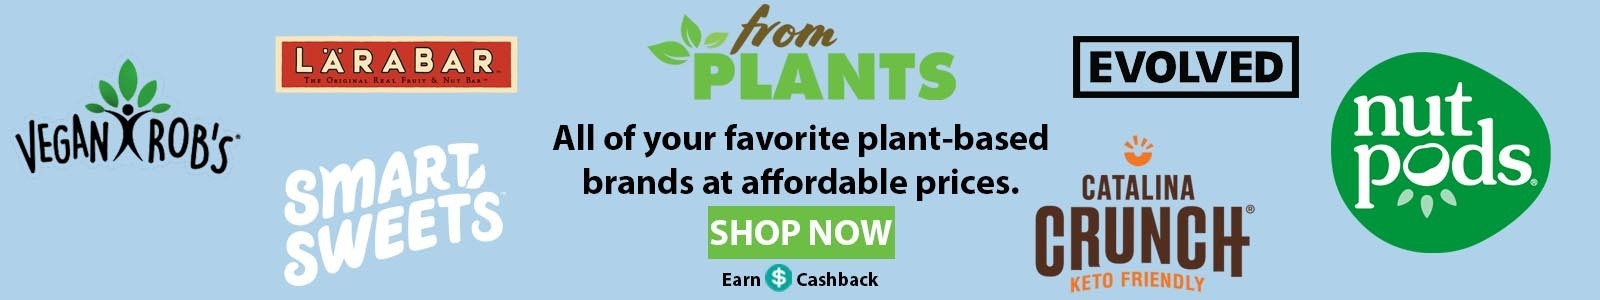 FromPlants offers all of your favorite brands, an affordable price, a healthier plant-based lifestyle.